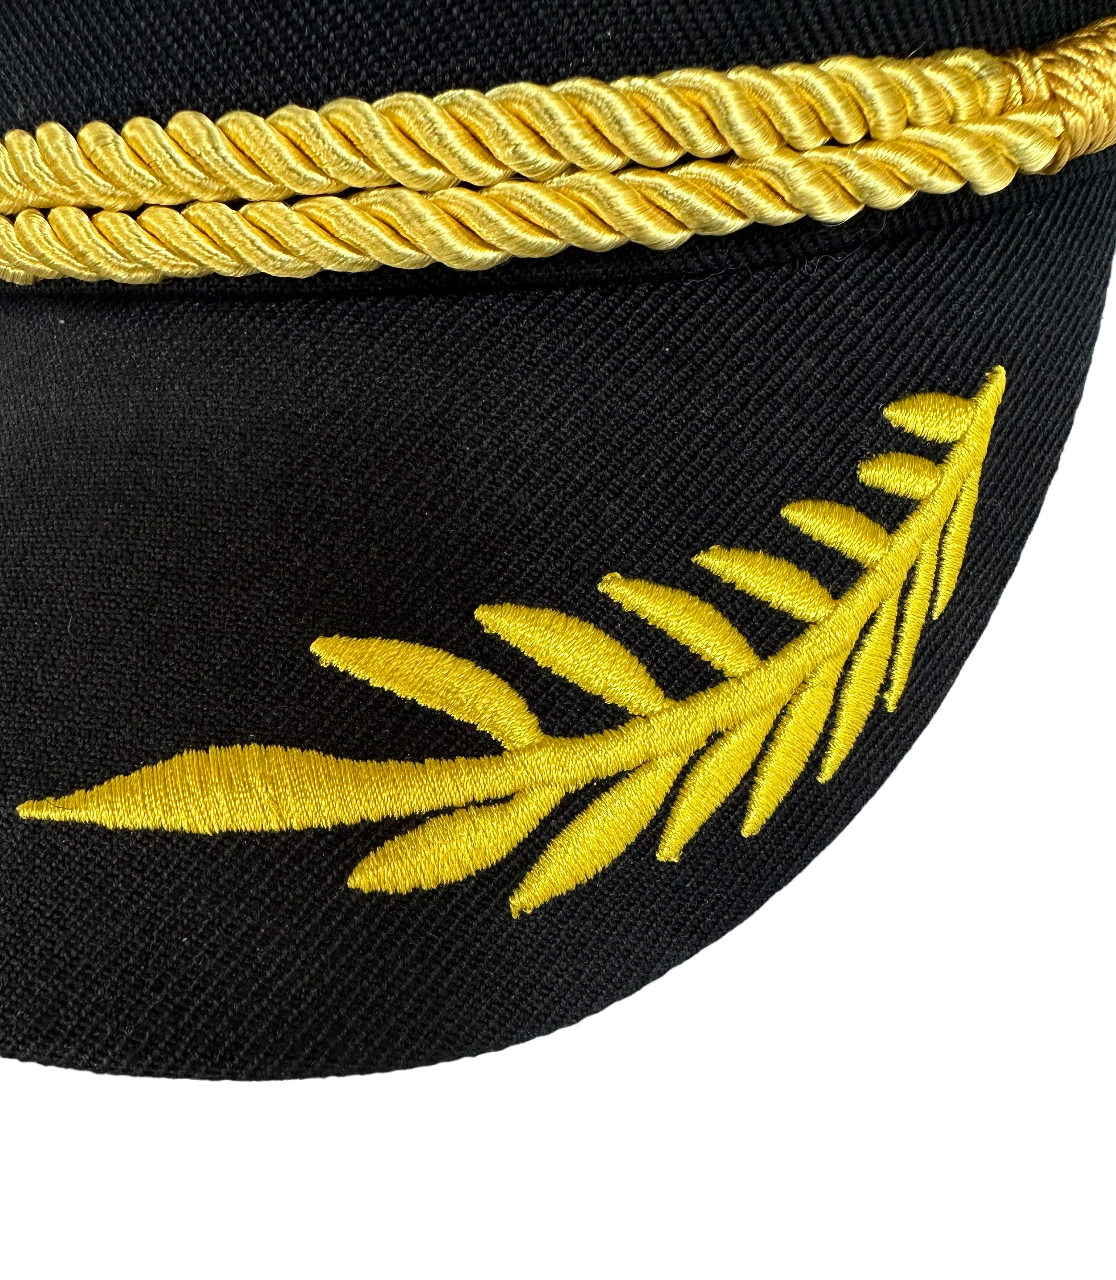 Captain hat by Captain Supply